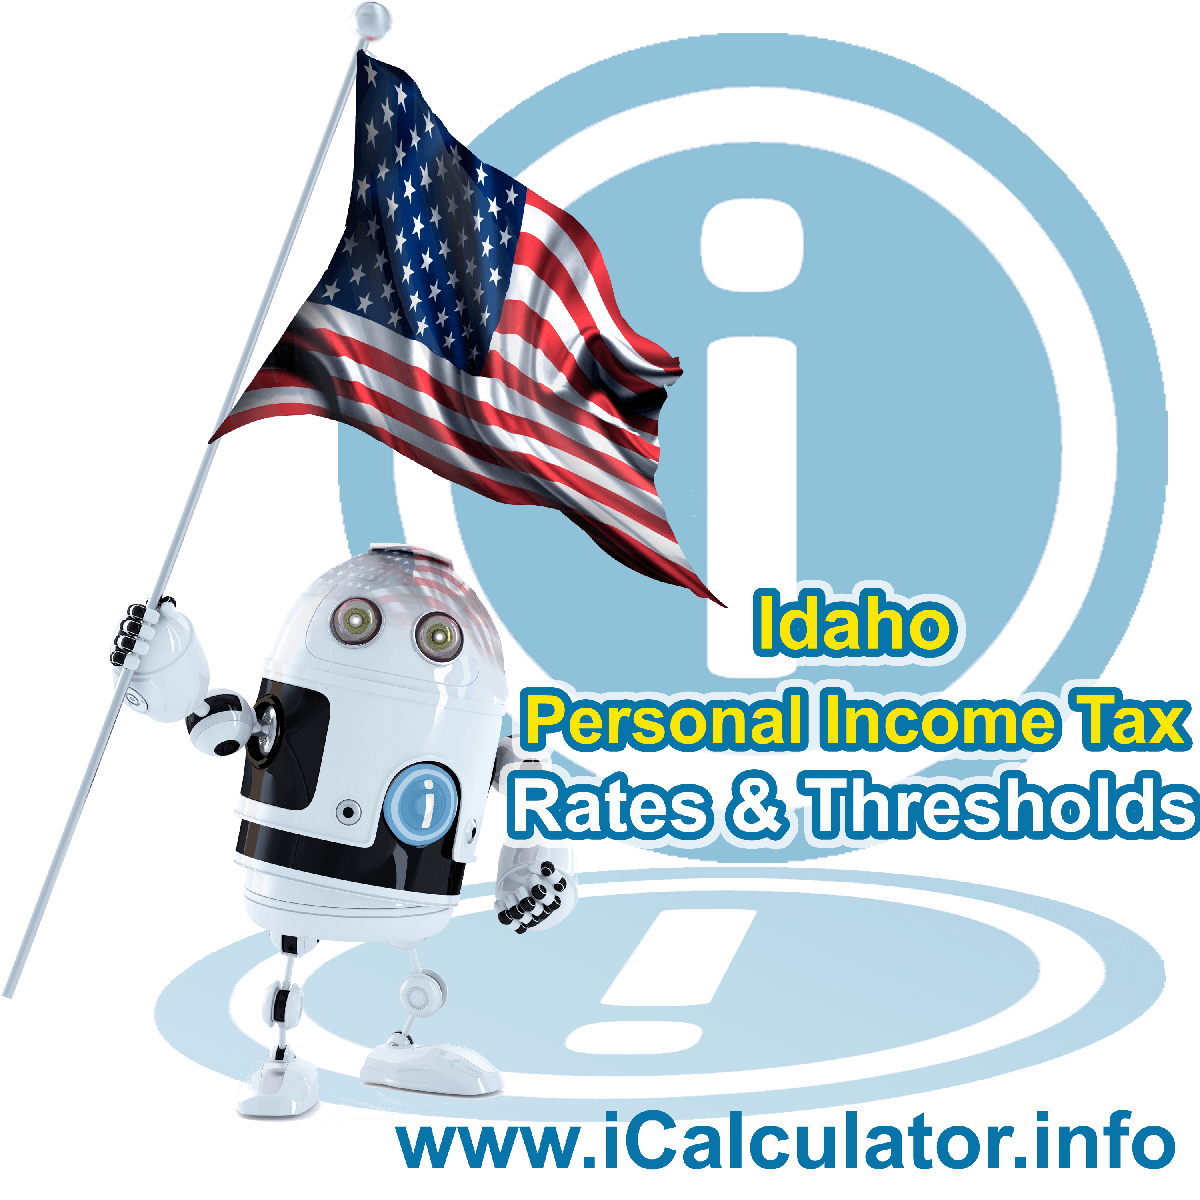 Idaho State Tax Tables 2019. This image displays details of the Idaho State Tax Tables for the 2019 tax return year which is provided in support of the 2019 US Tax Calculator